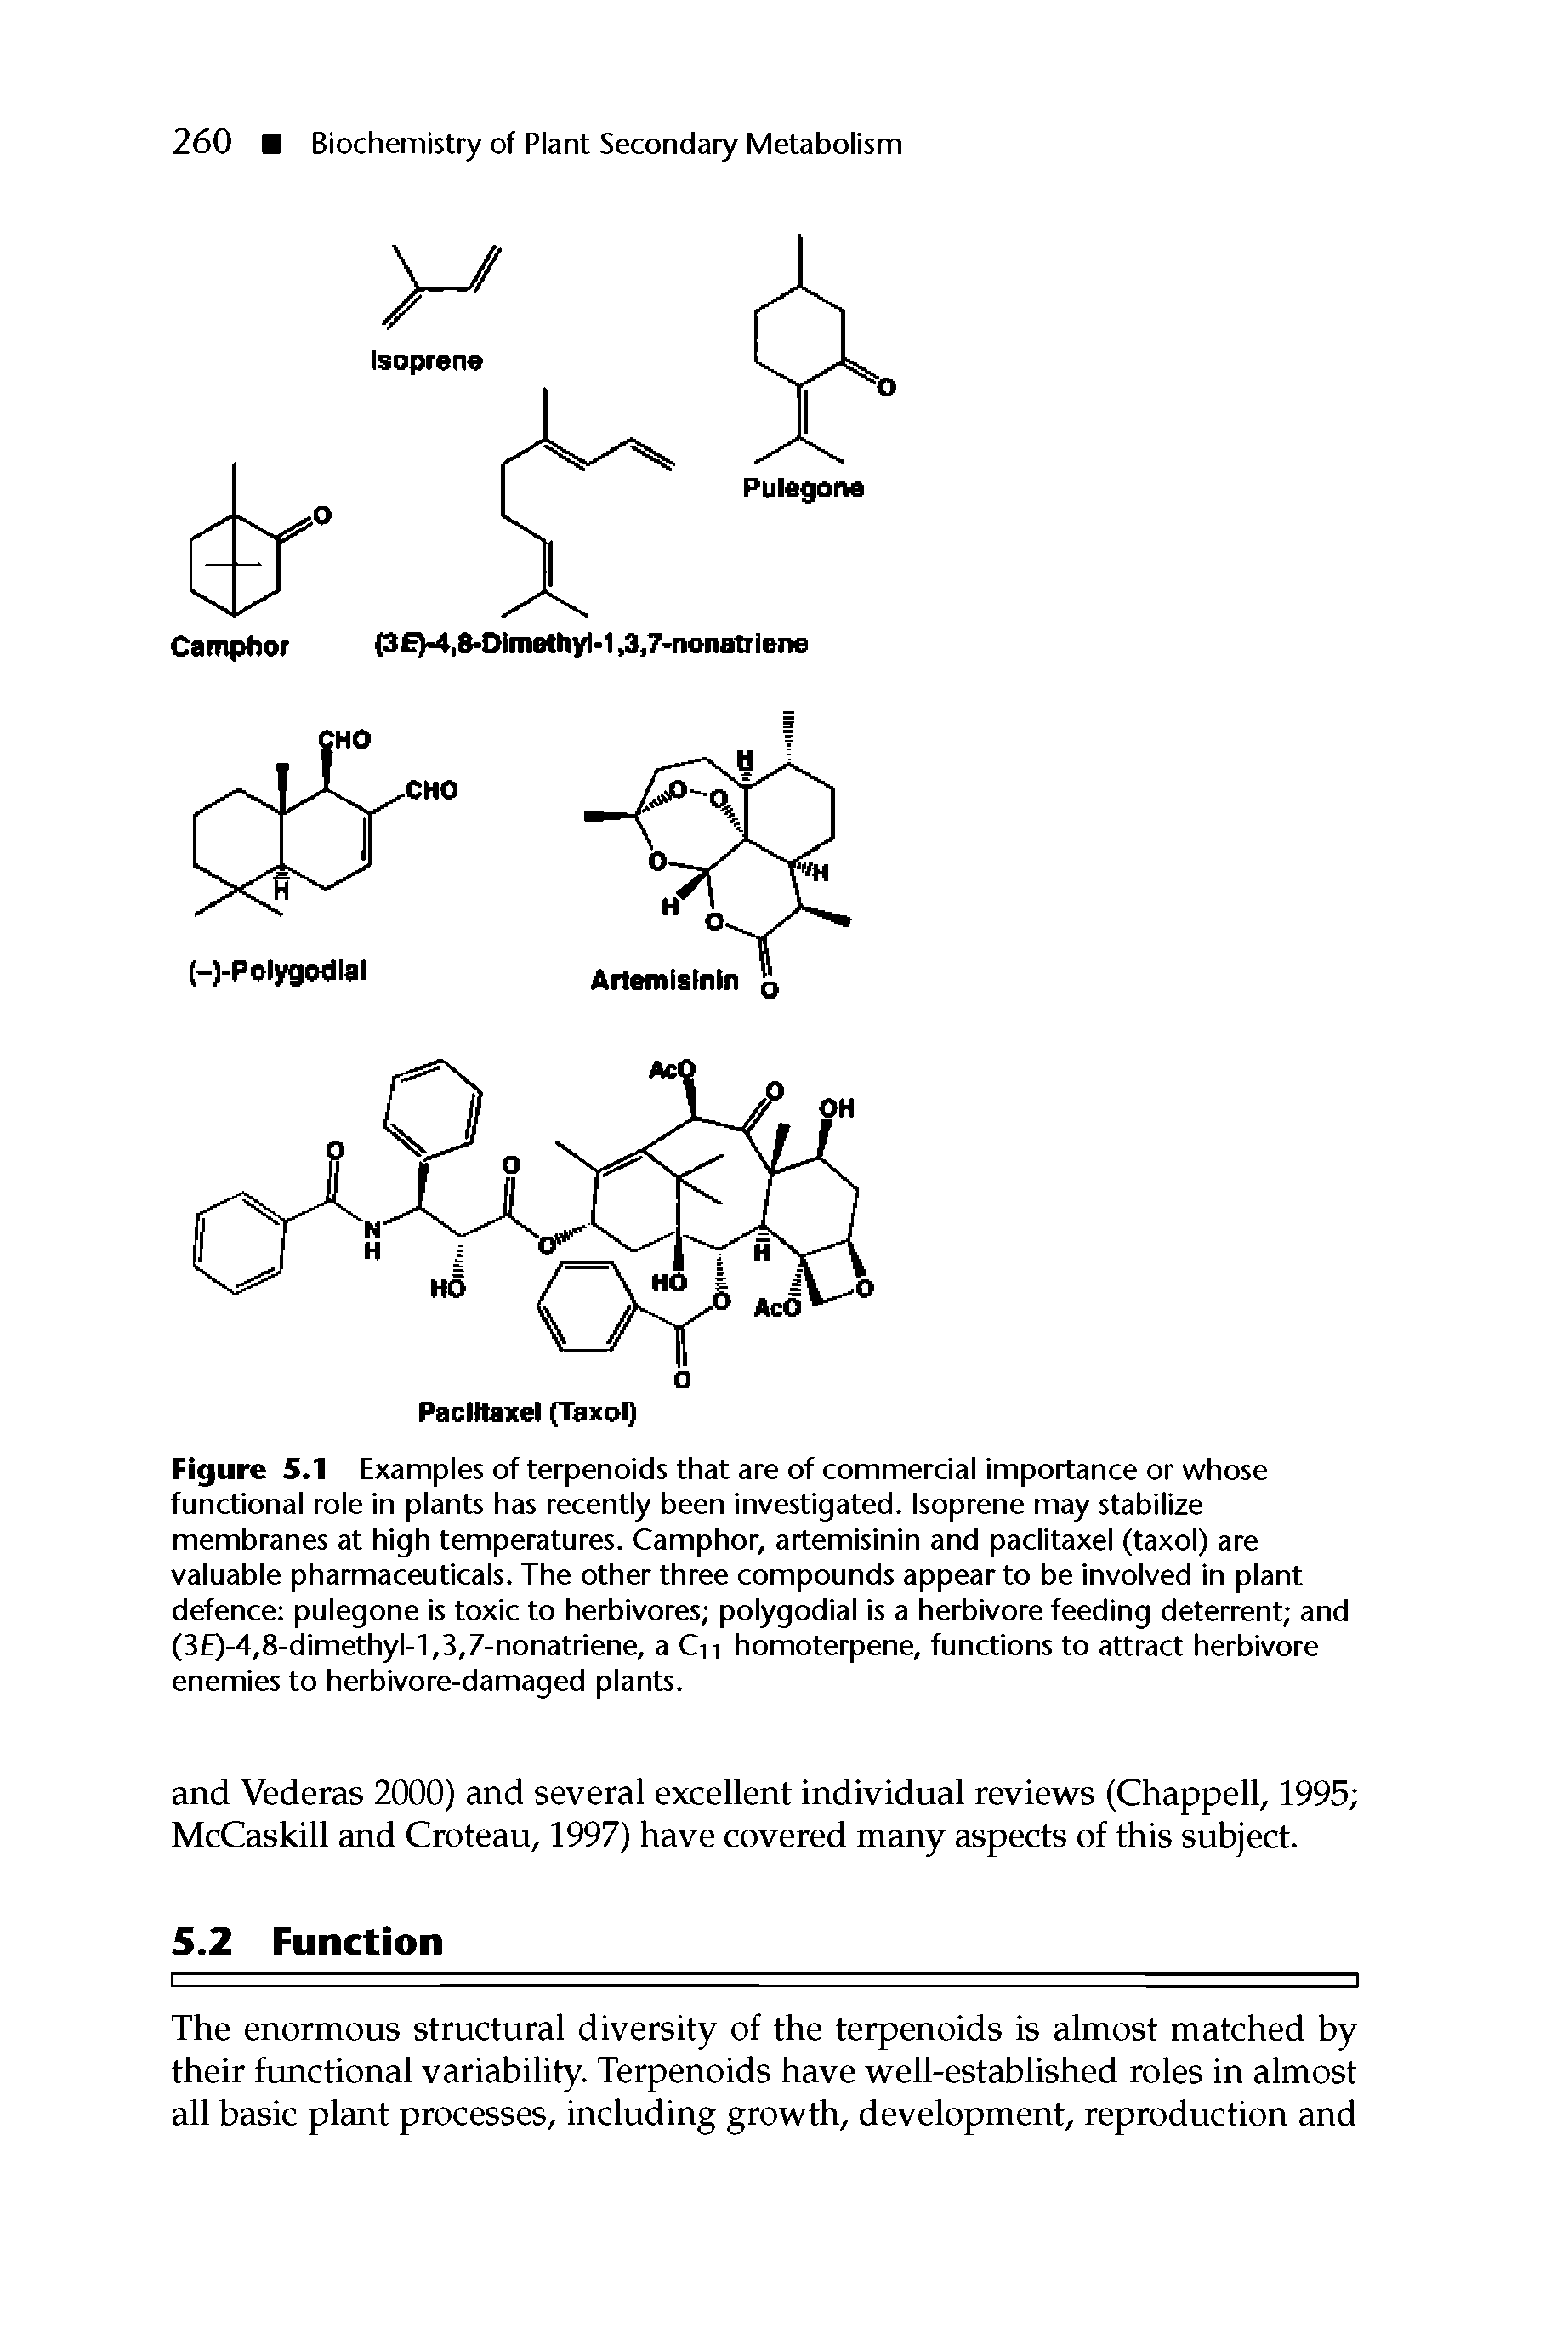 Figure 5.1 Examples of terpenoids that are of commercial importance or whose functional role in plants has recently been investigated. Isoprene may stabilize membranes at high temperatures. Camphor, artemisinin and paclitaxel (taxol) are valuable pharmaceuticals. The other three compounds appear to be involved in plant defence pulegone is toxic to herbivores polygodial is a herbivore feeding deterrent and (3 )-4,8-dimethyl-1,3,7-nonatriene, a Cn homoterpene, functions to attract herbivore enemies to herbivore-damaged plants.